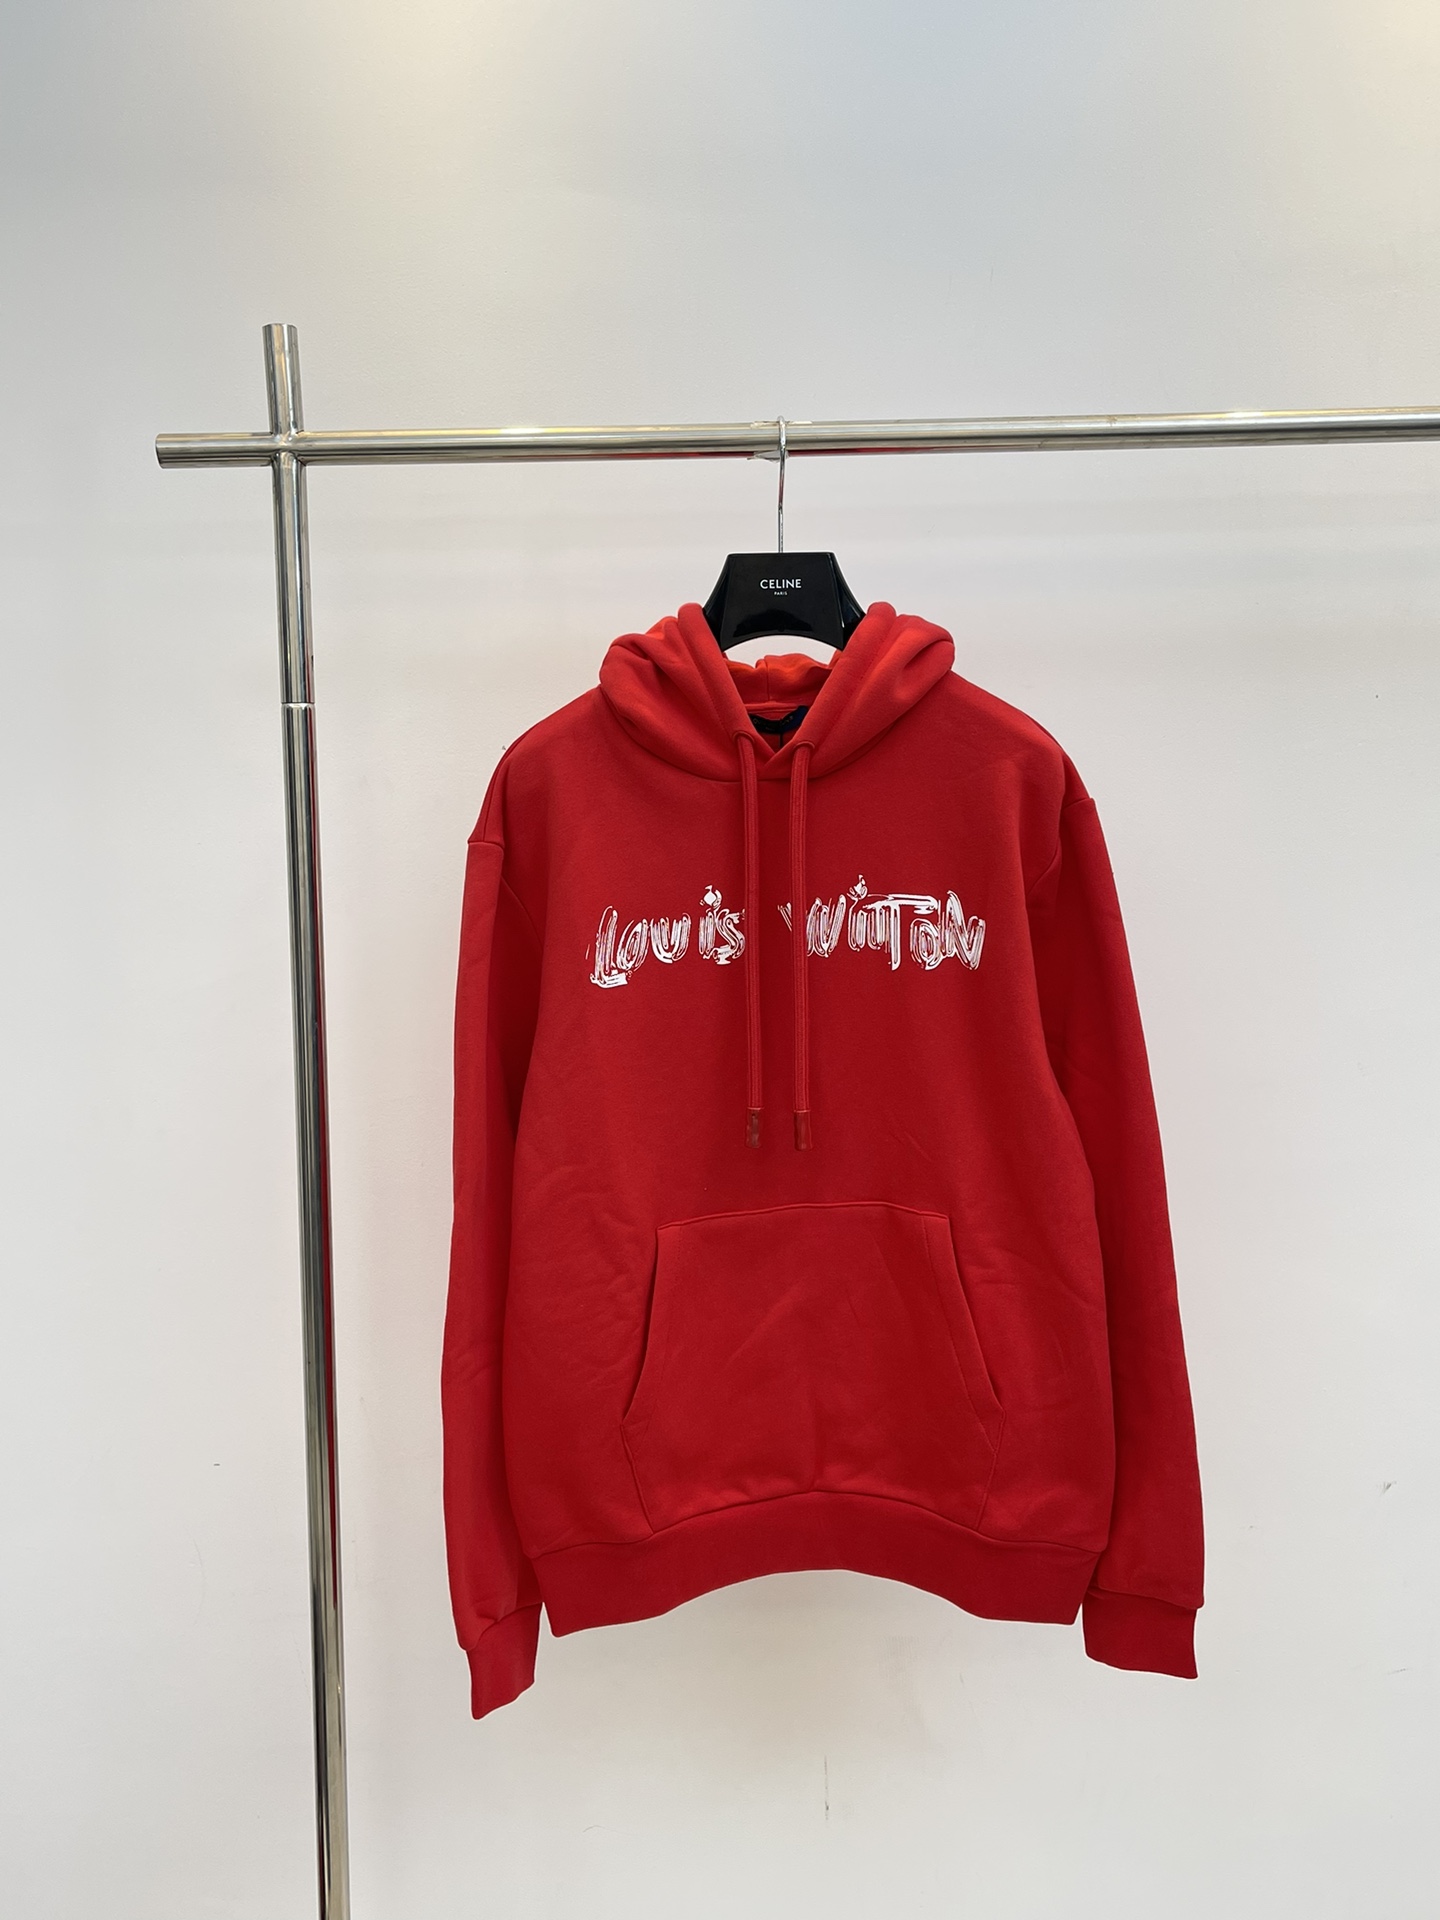 Louis Vuitton Clothing Hoodies Doodle Printing Cotton Fall Collection Hooded Top